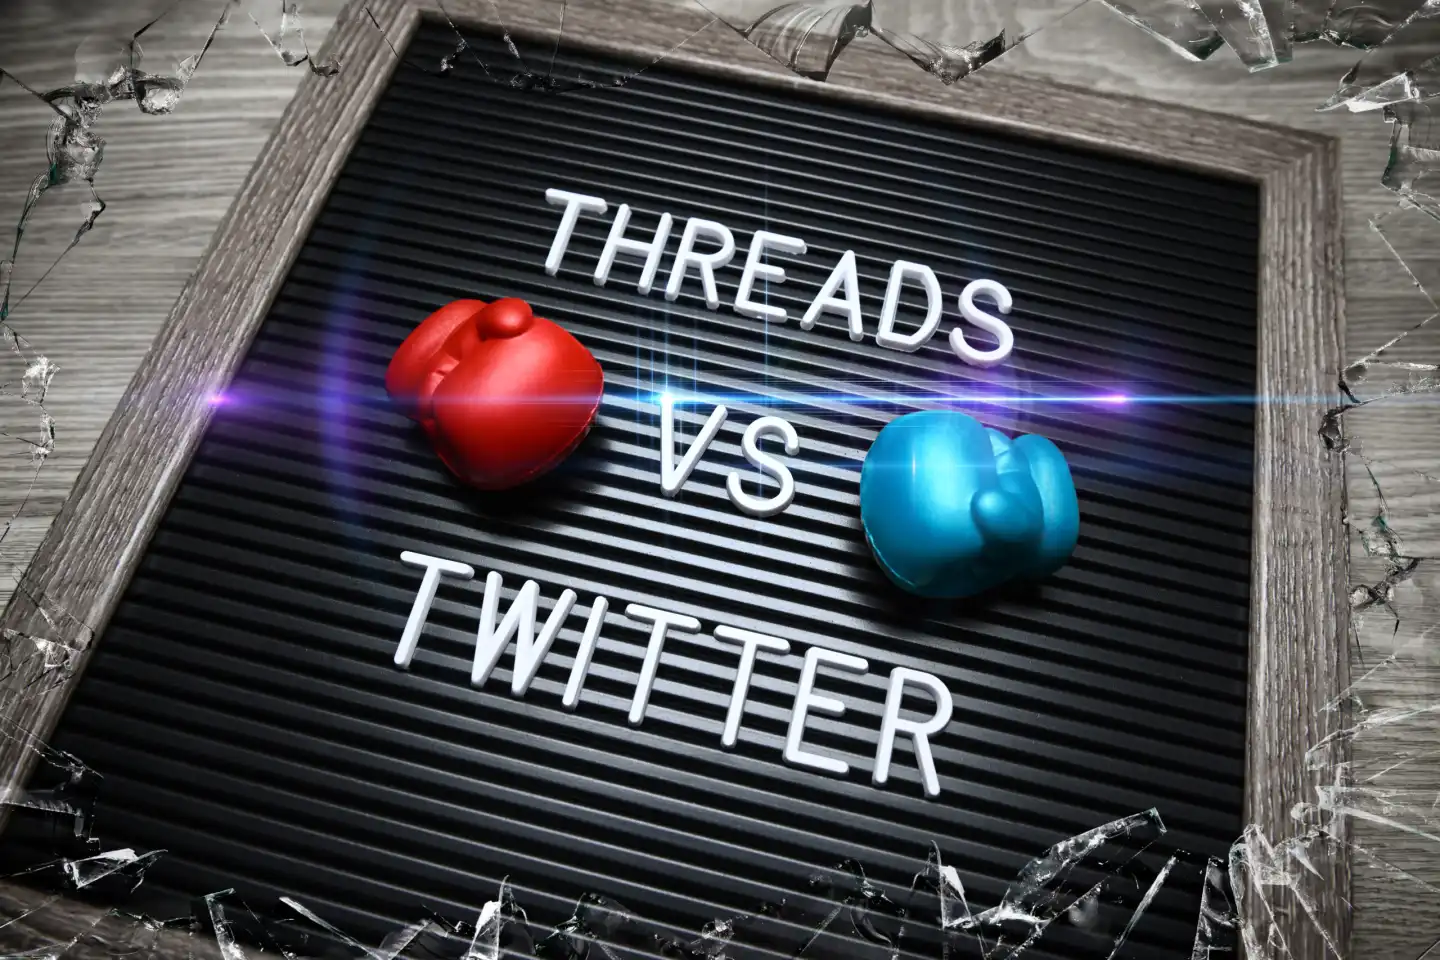 Boxing glove board says Threads vs Twitter, new short message service Threads aims to compete with Twitter